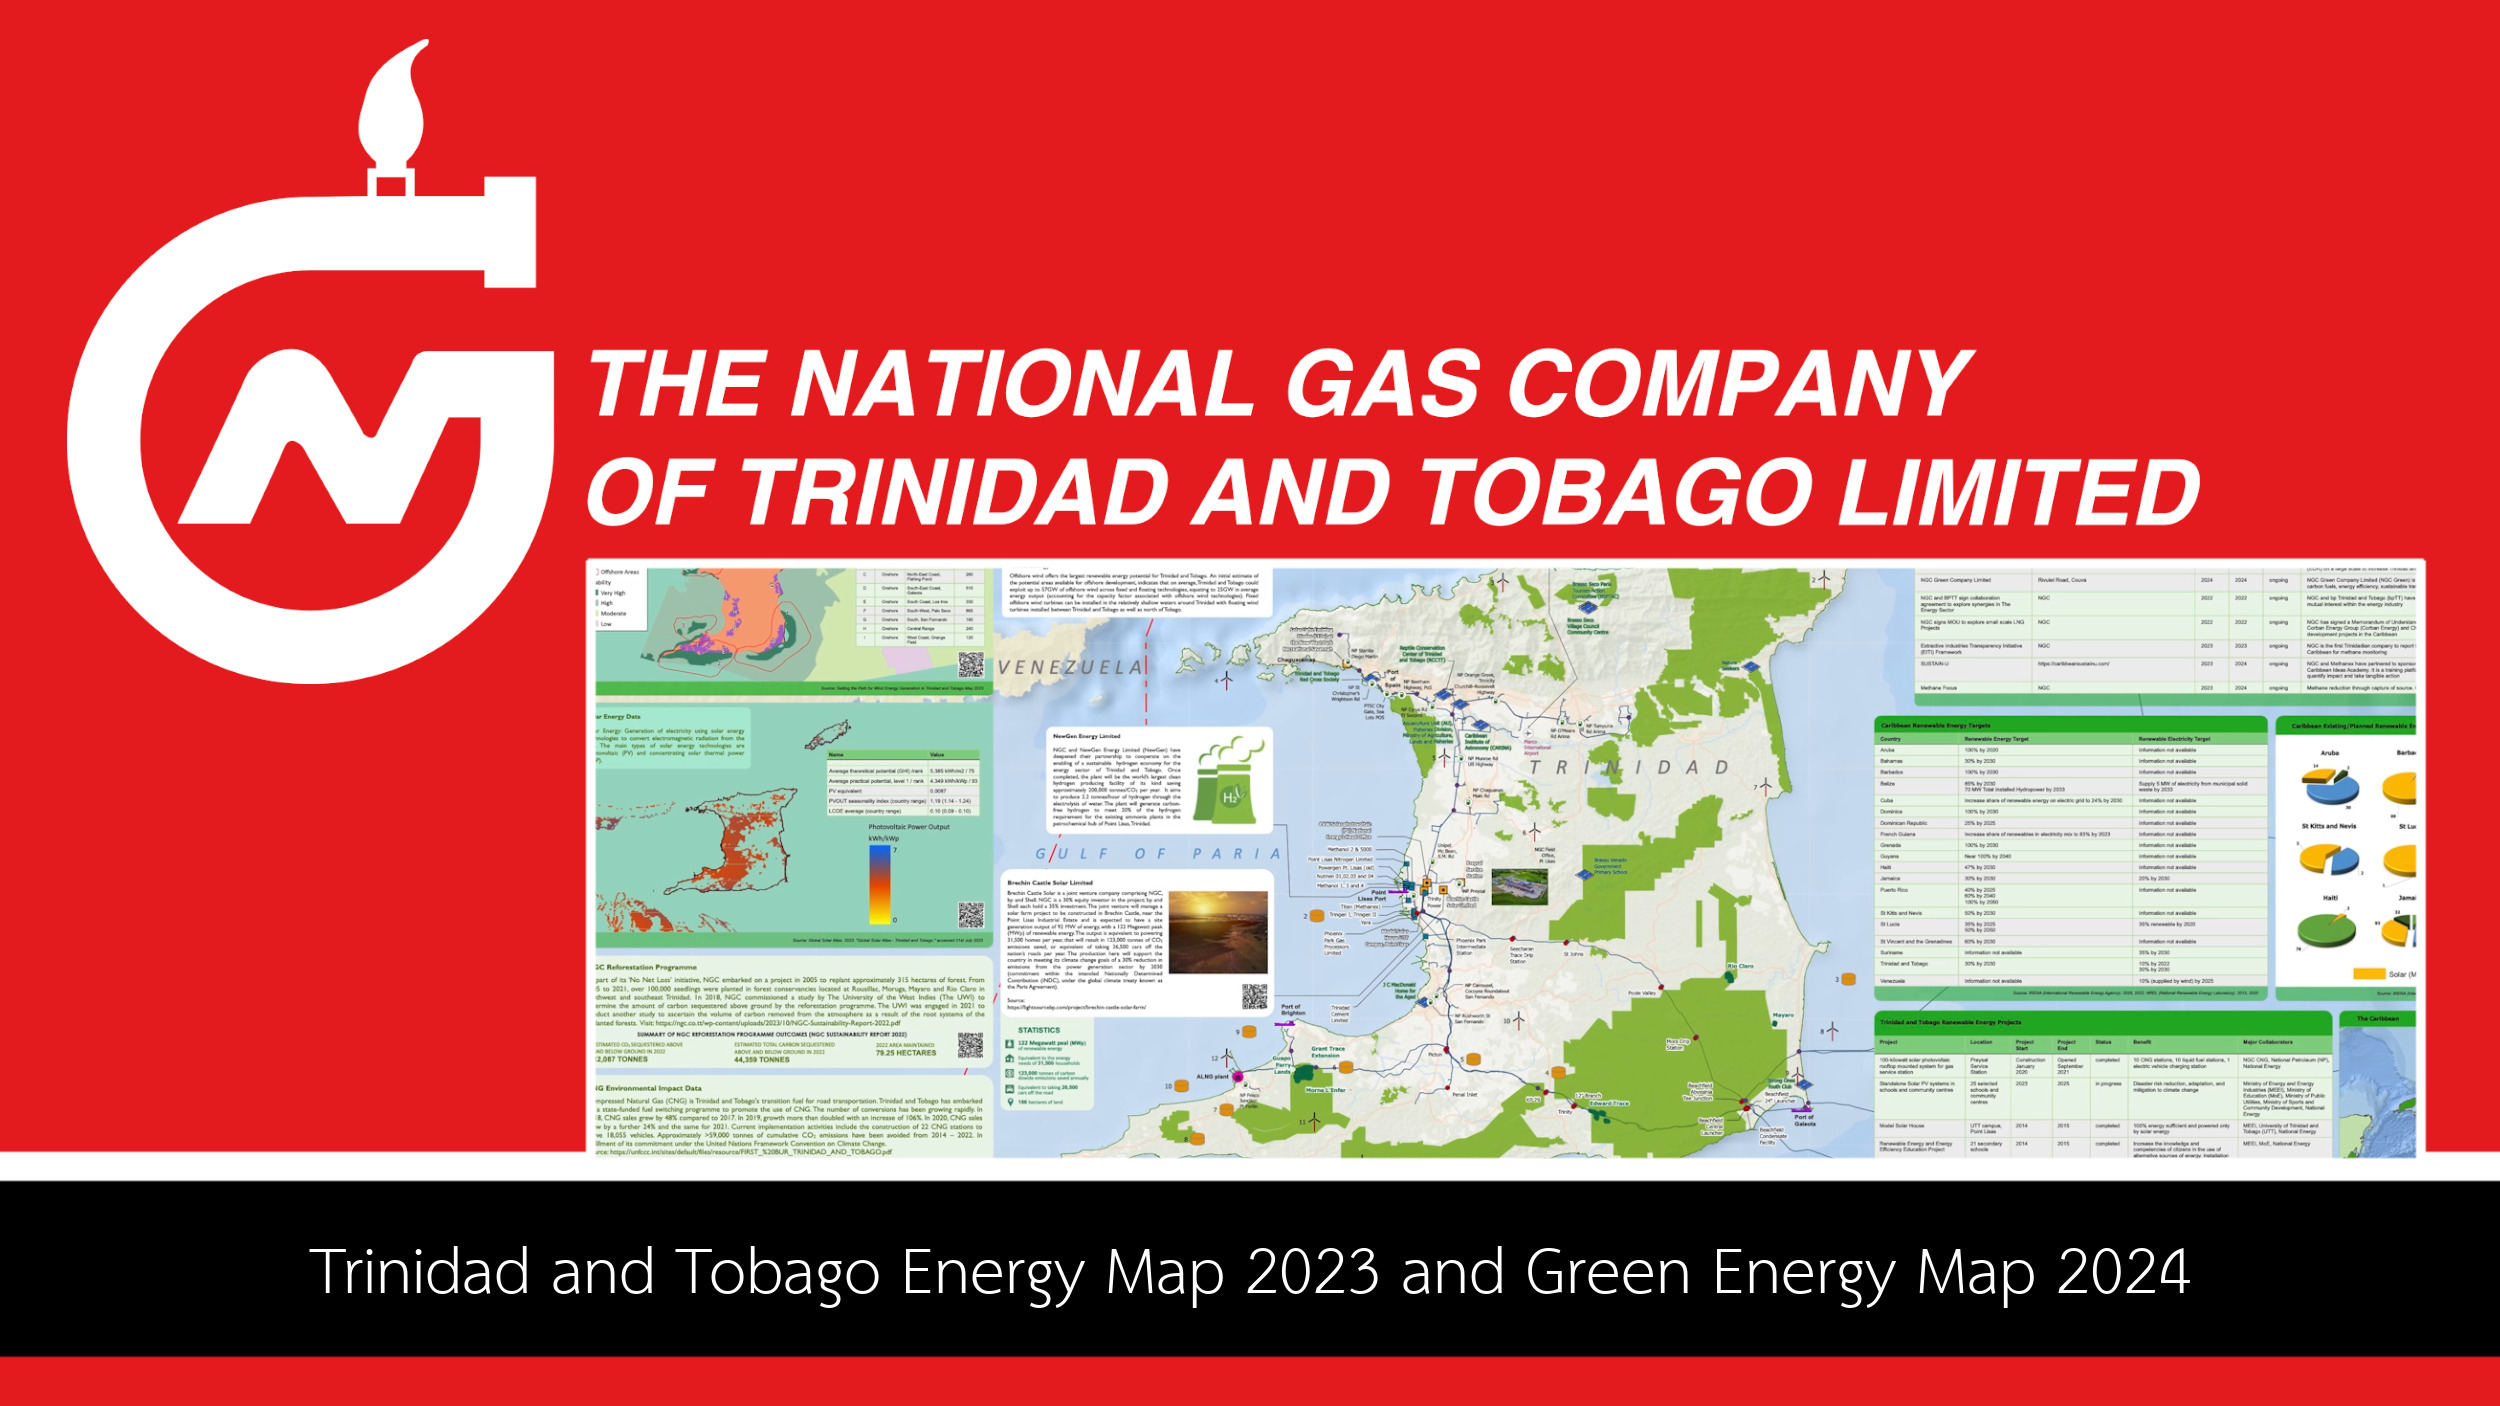 Trinidad and Tobago Energy Map 2023 and Green Energy Map 2024